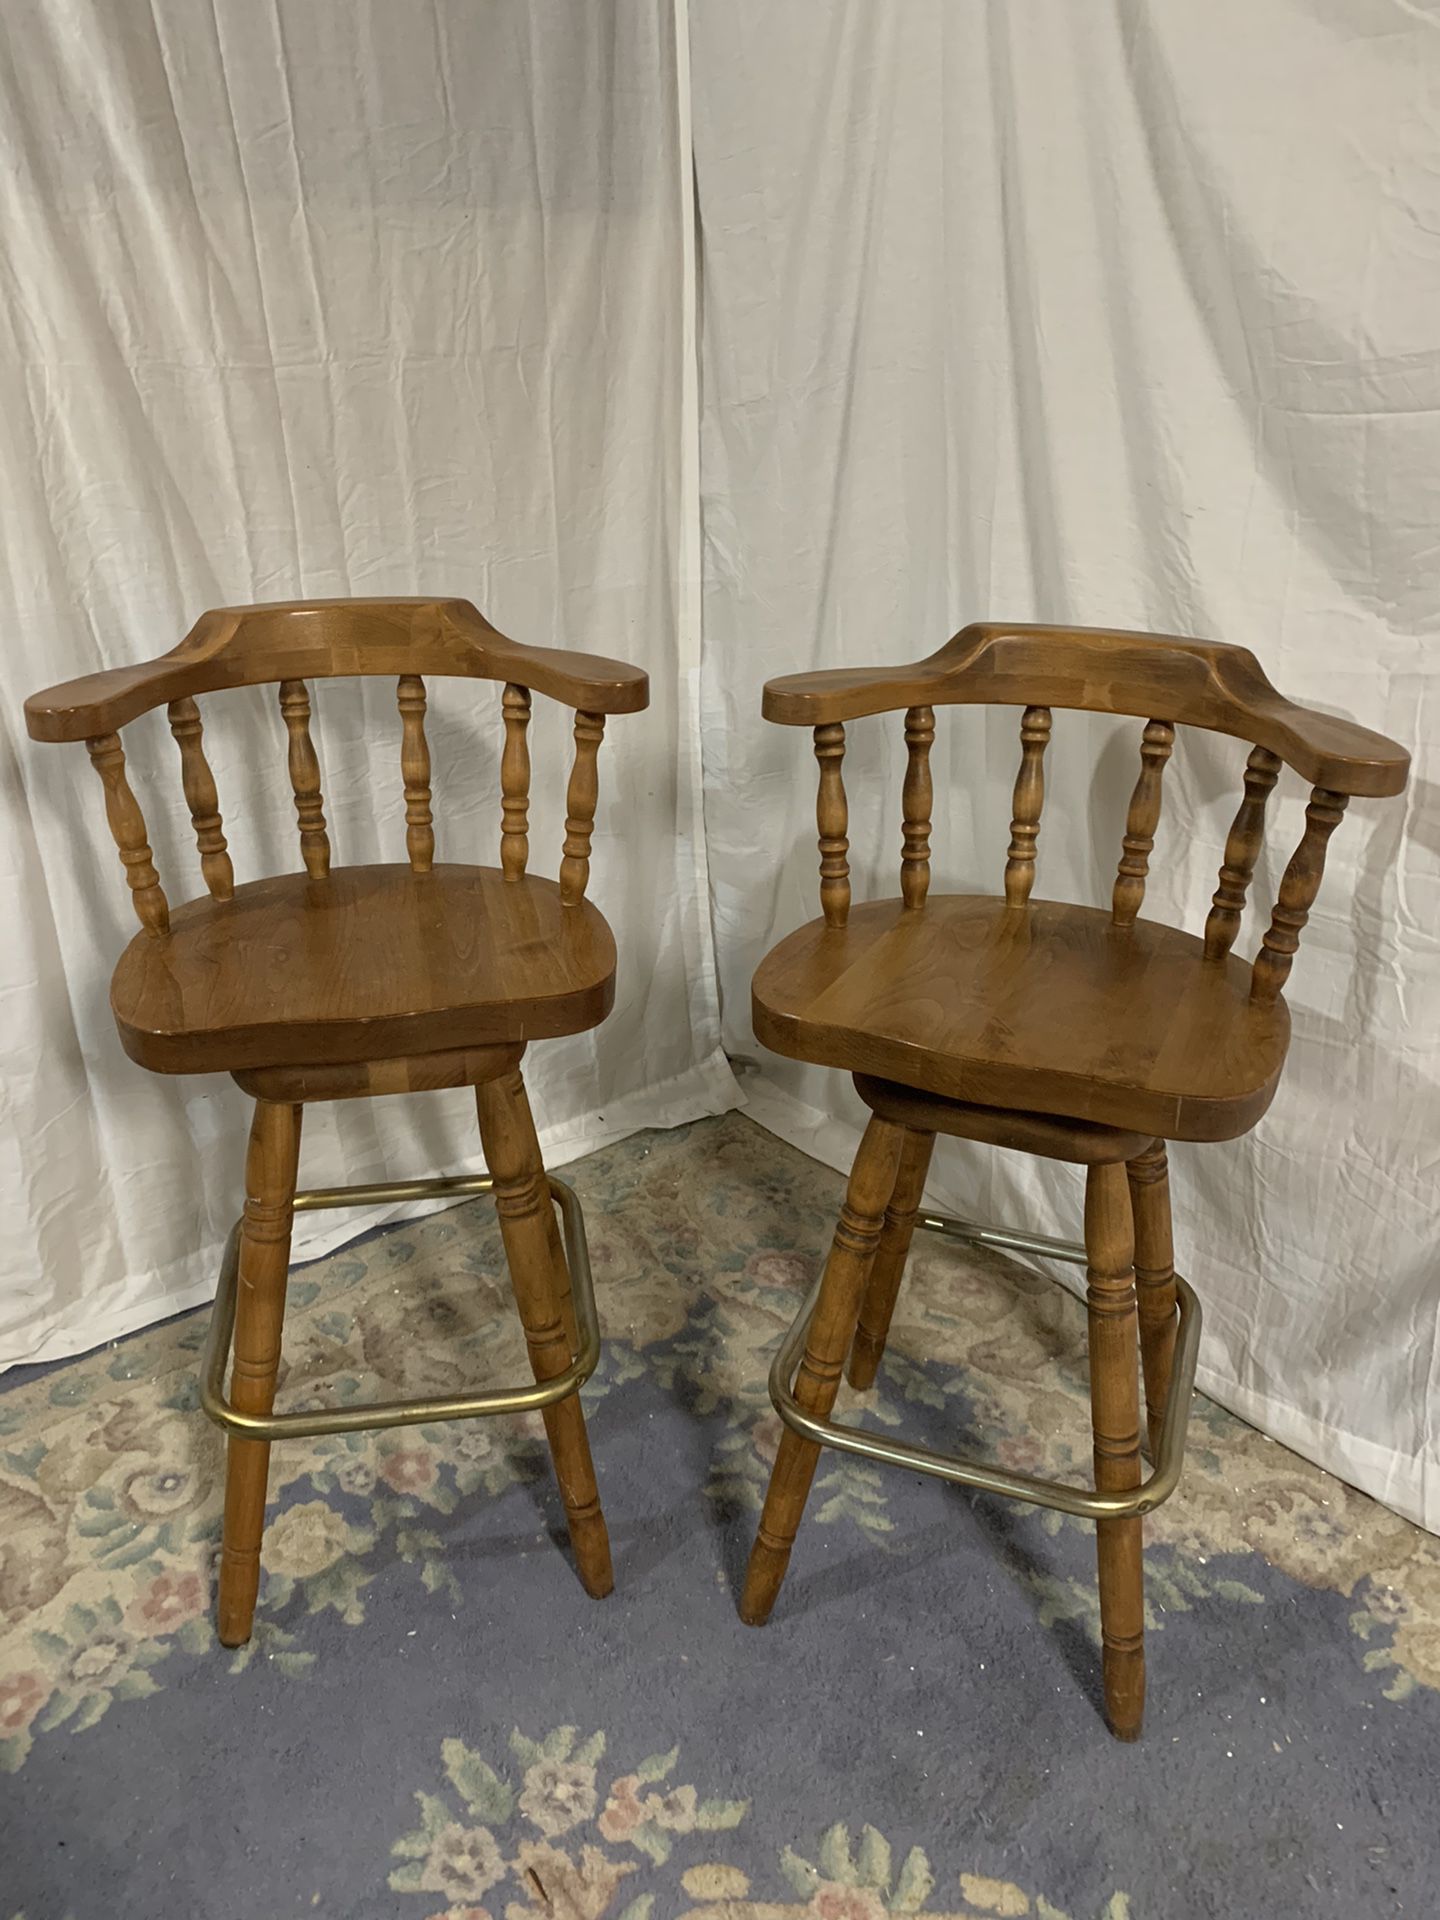 Pair of Matching Wooden Bar Stools, Both Very Sturdy & Swivel Like New (Bar Height - Seat is 30”)